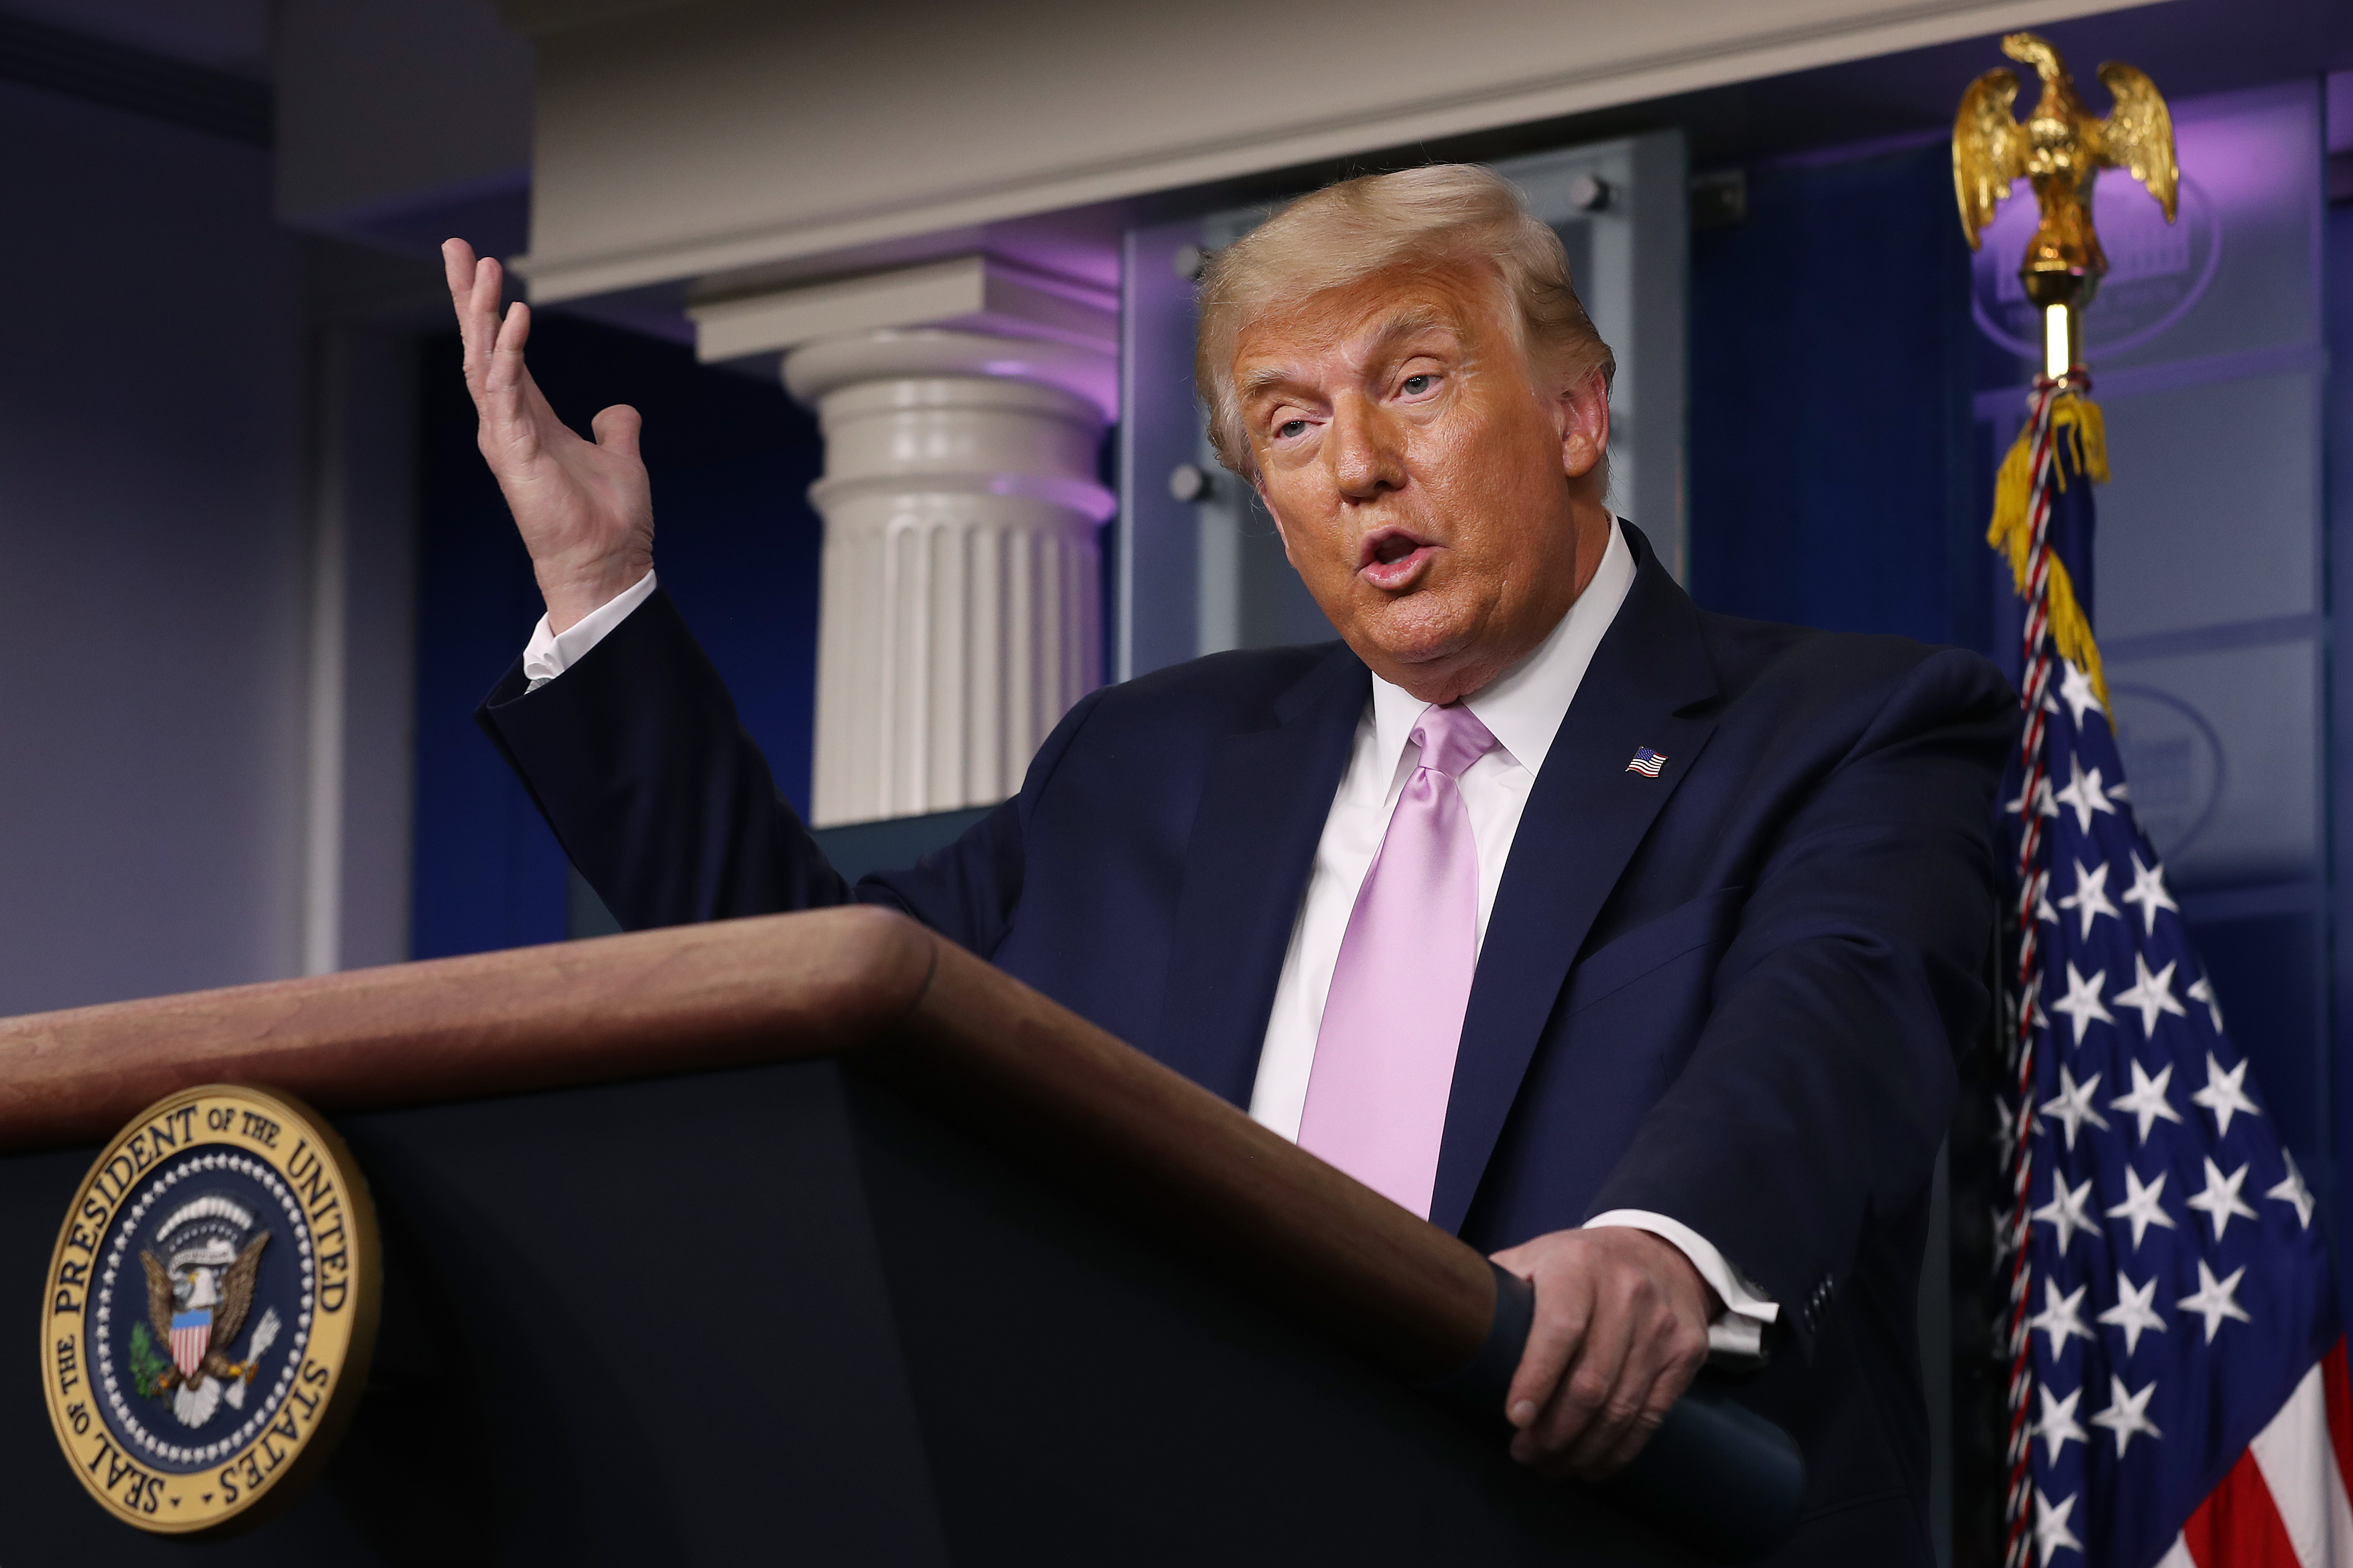 U.S. President Donald Trump holds a news conference in the Brady Press Briefing Room at the White House August 19, 2020 in Washington, DC. (Chip Somodevilla/Getty Images)